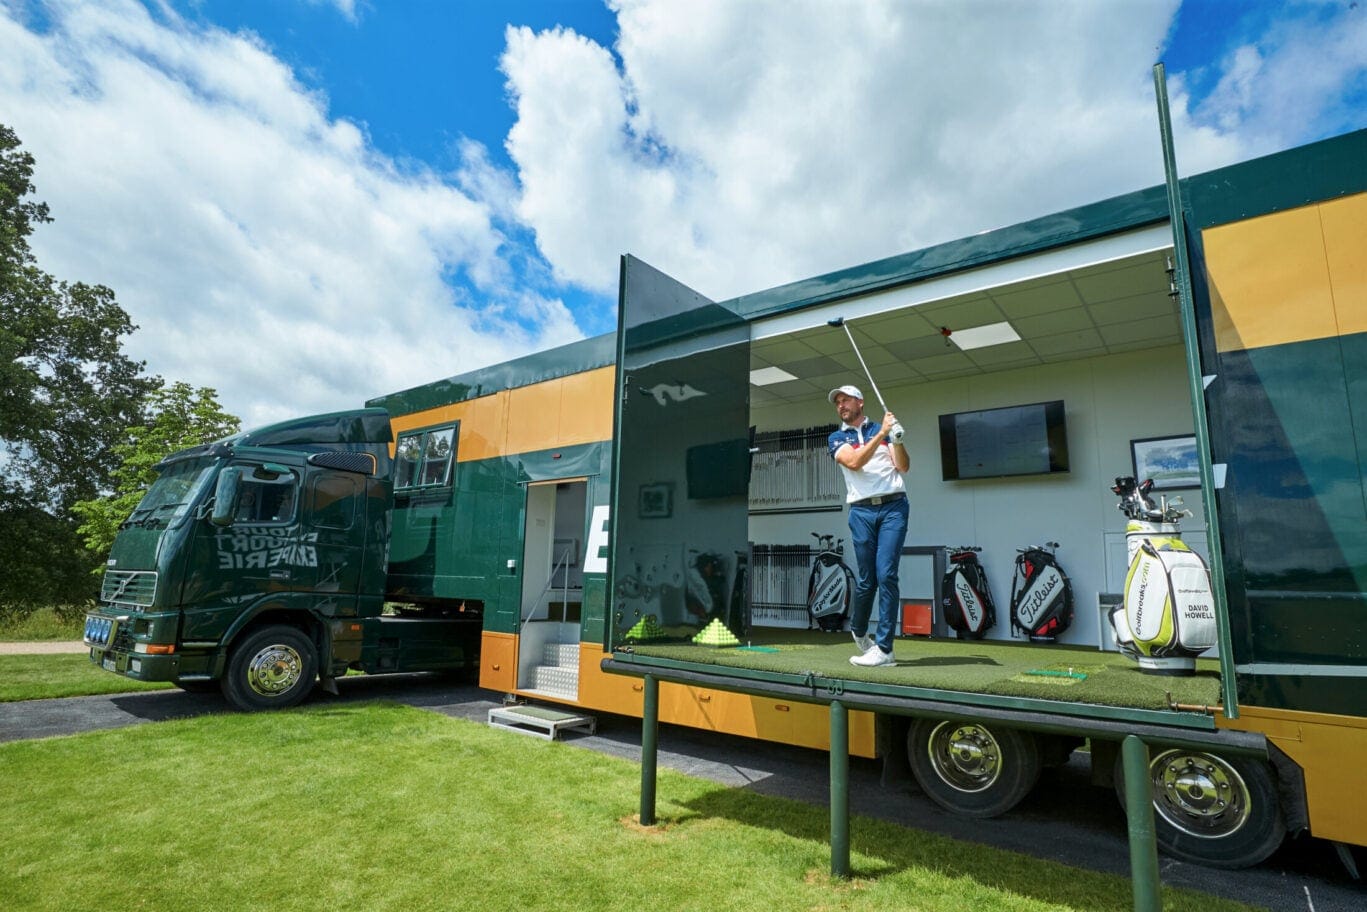 Golf from a trailer